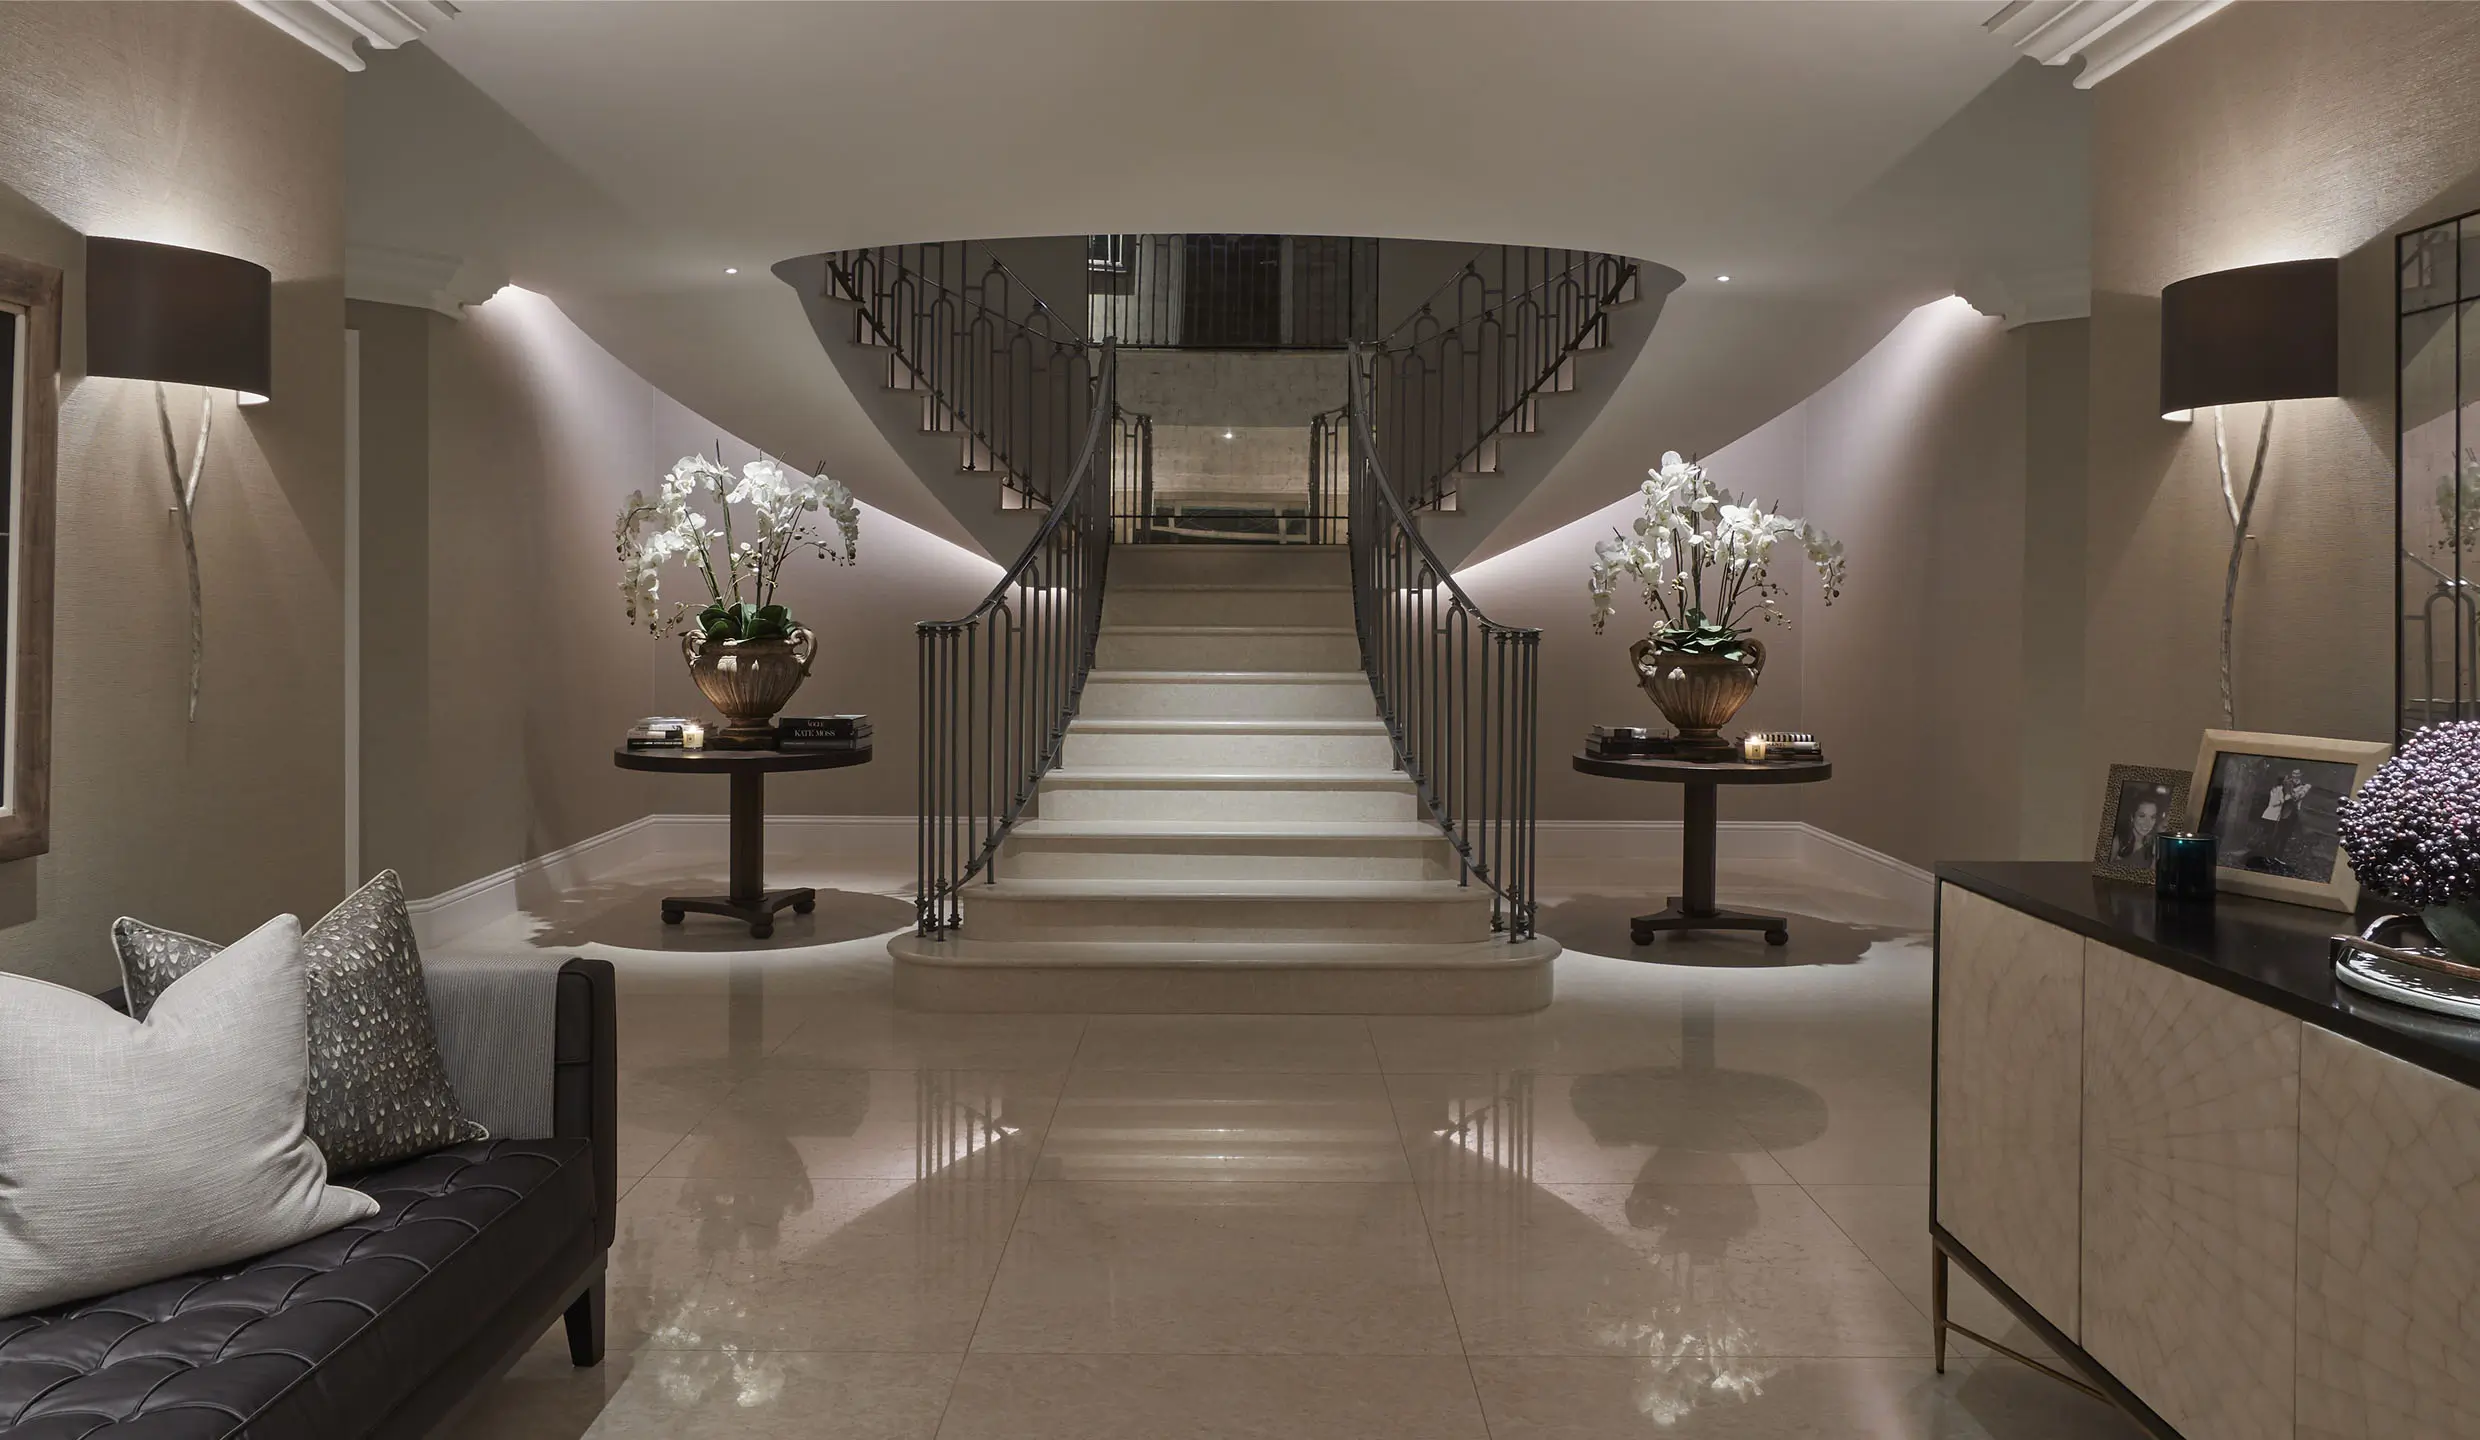 grand entrance hall with sweeping staircase with linear light underneath and orchids on tables either side